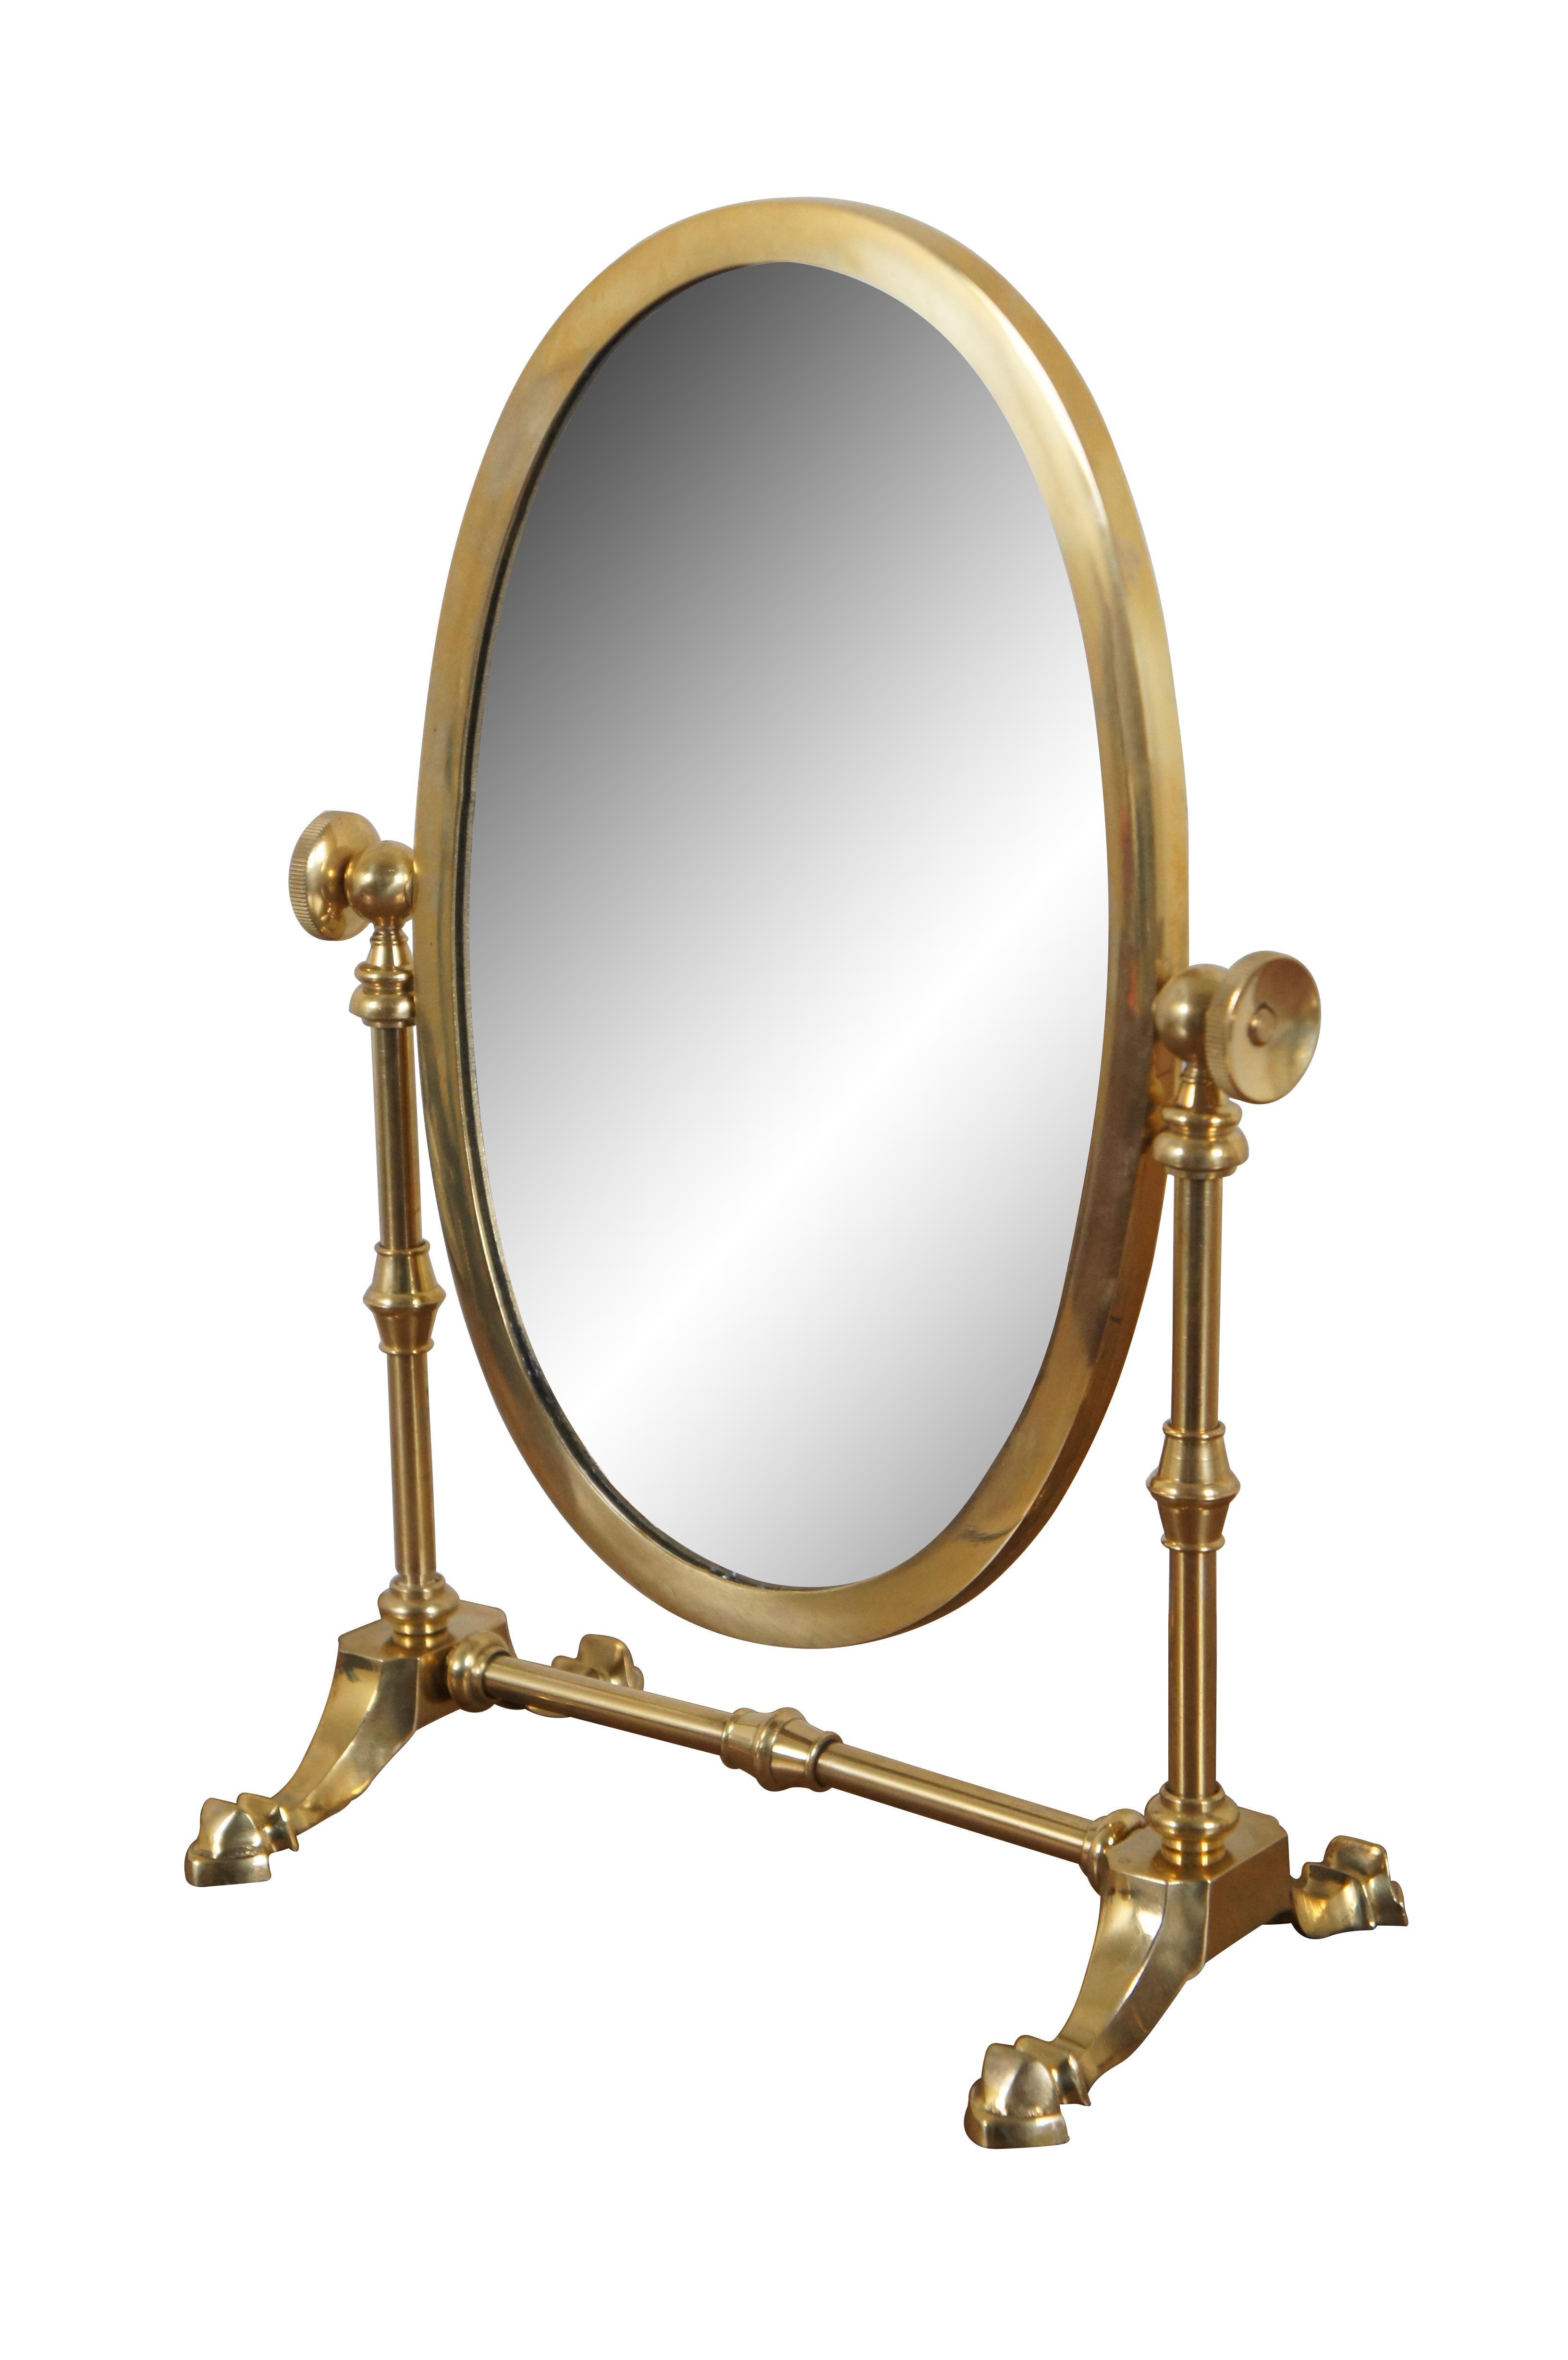 Mid to late 20th century tabletop vanity / shaving mirror featuring an oval mirror, adjustable tilt, and bright brass frame with trestle base.

Dimensions:

9